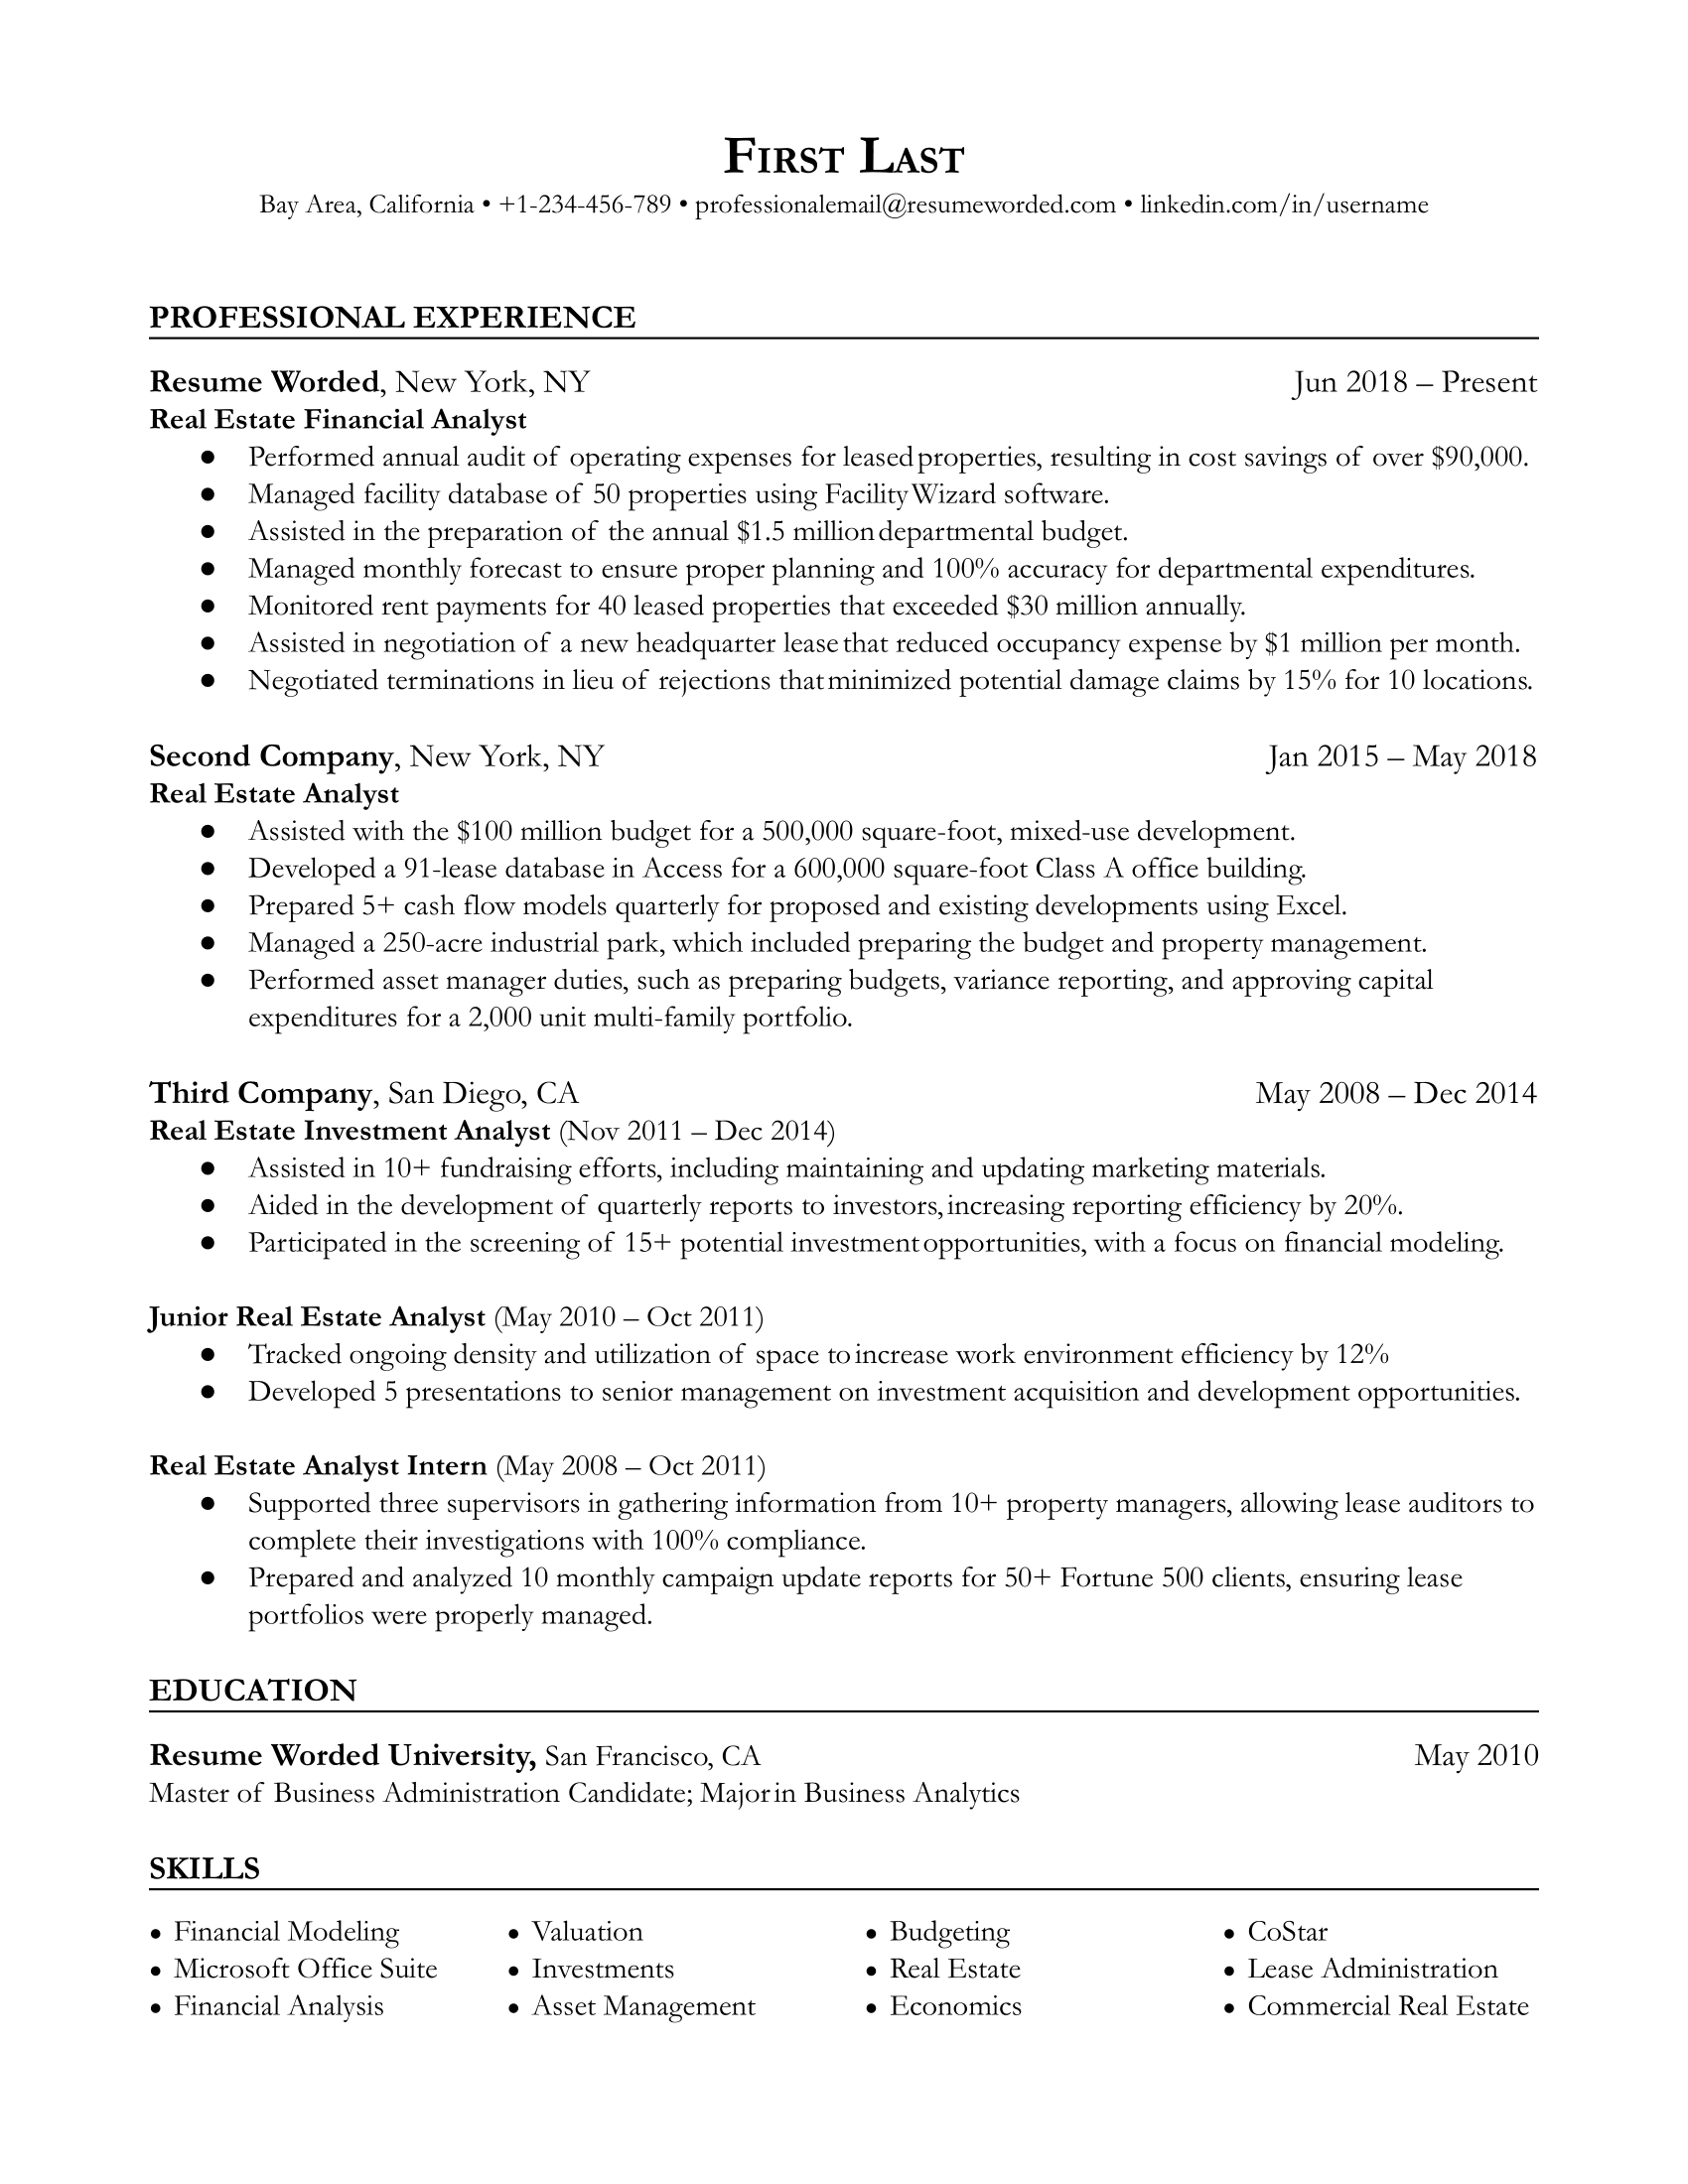 Real Estate Financial Analyst Resume Template + Example